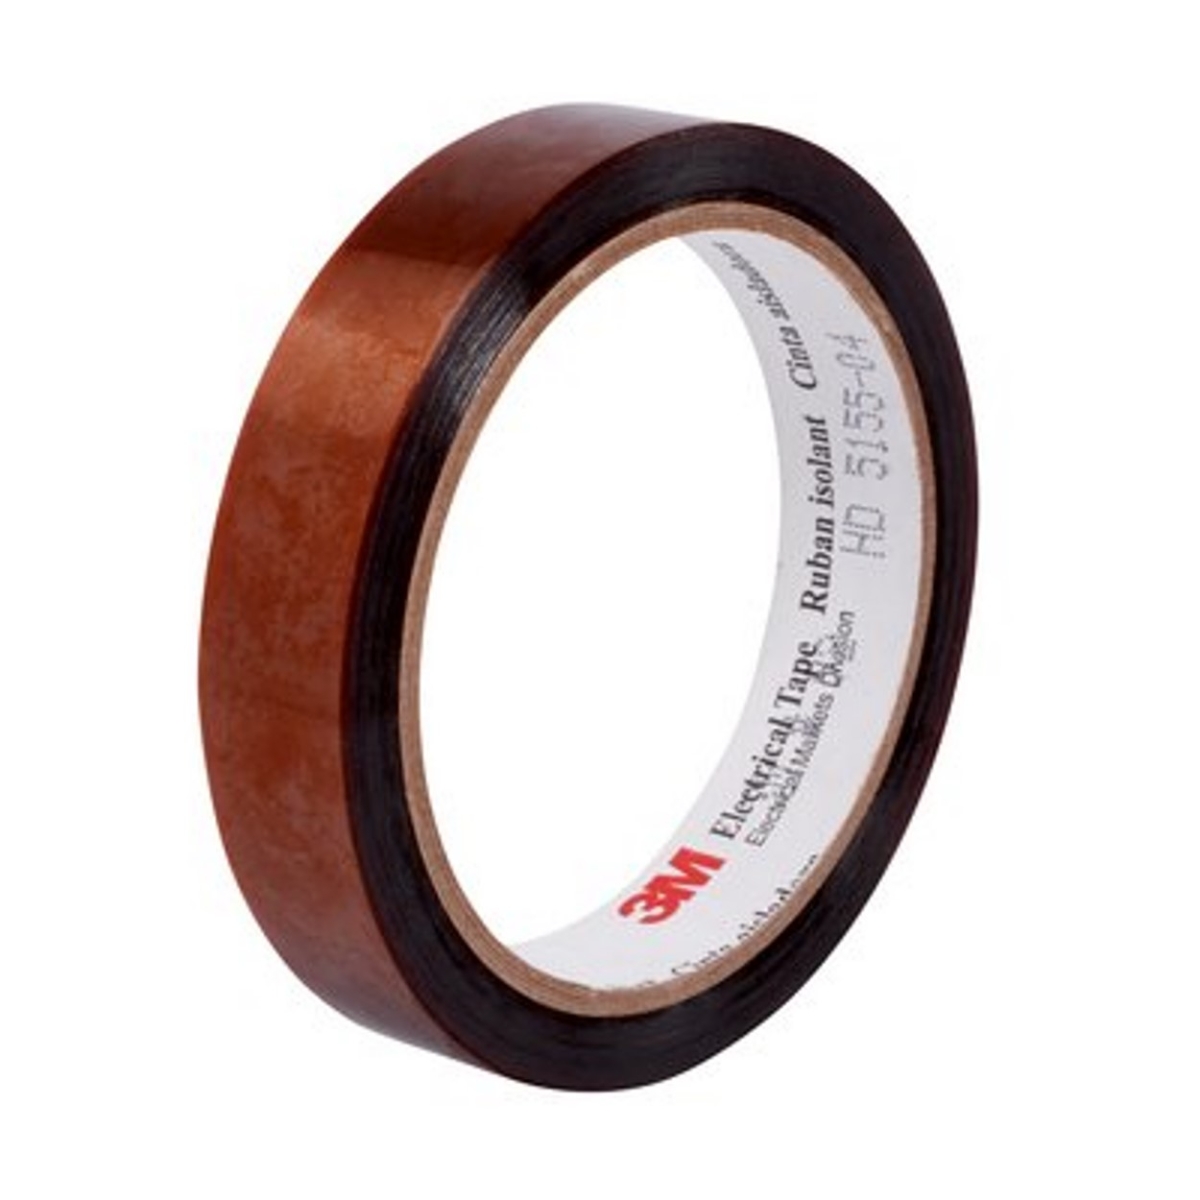 3M Scotch Glass Cloth Electrical Tape:Facility Safety and Maintenance:Tapes